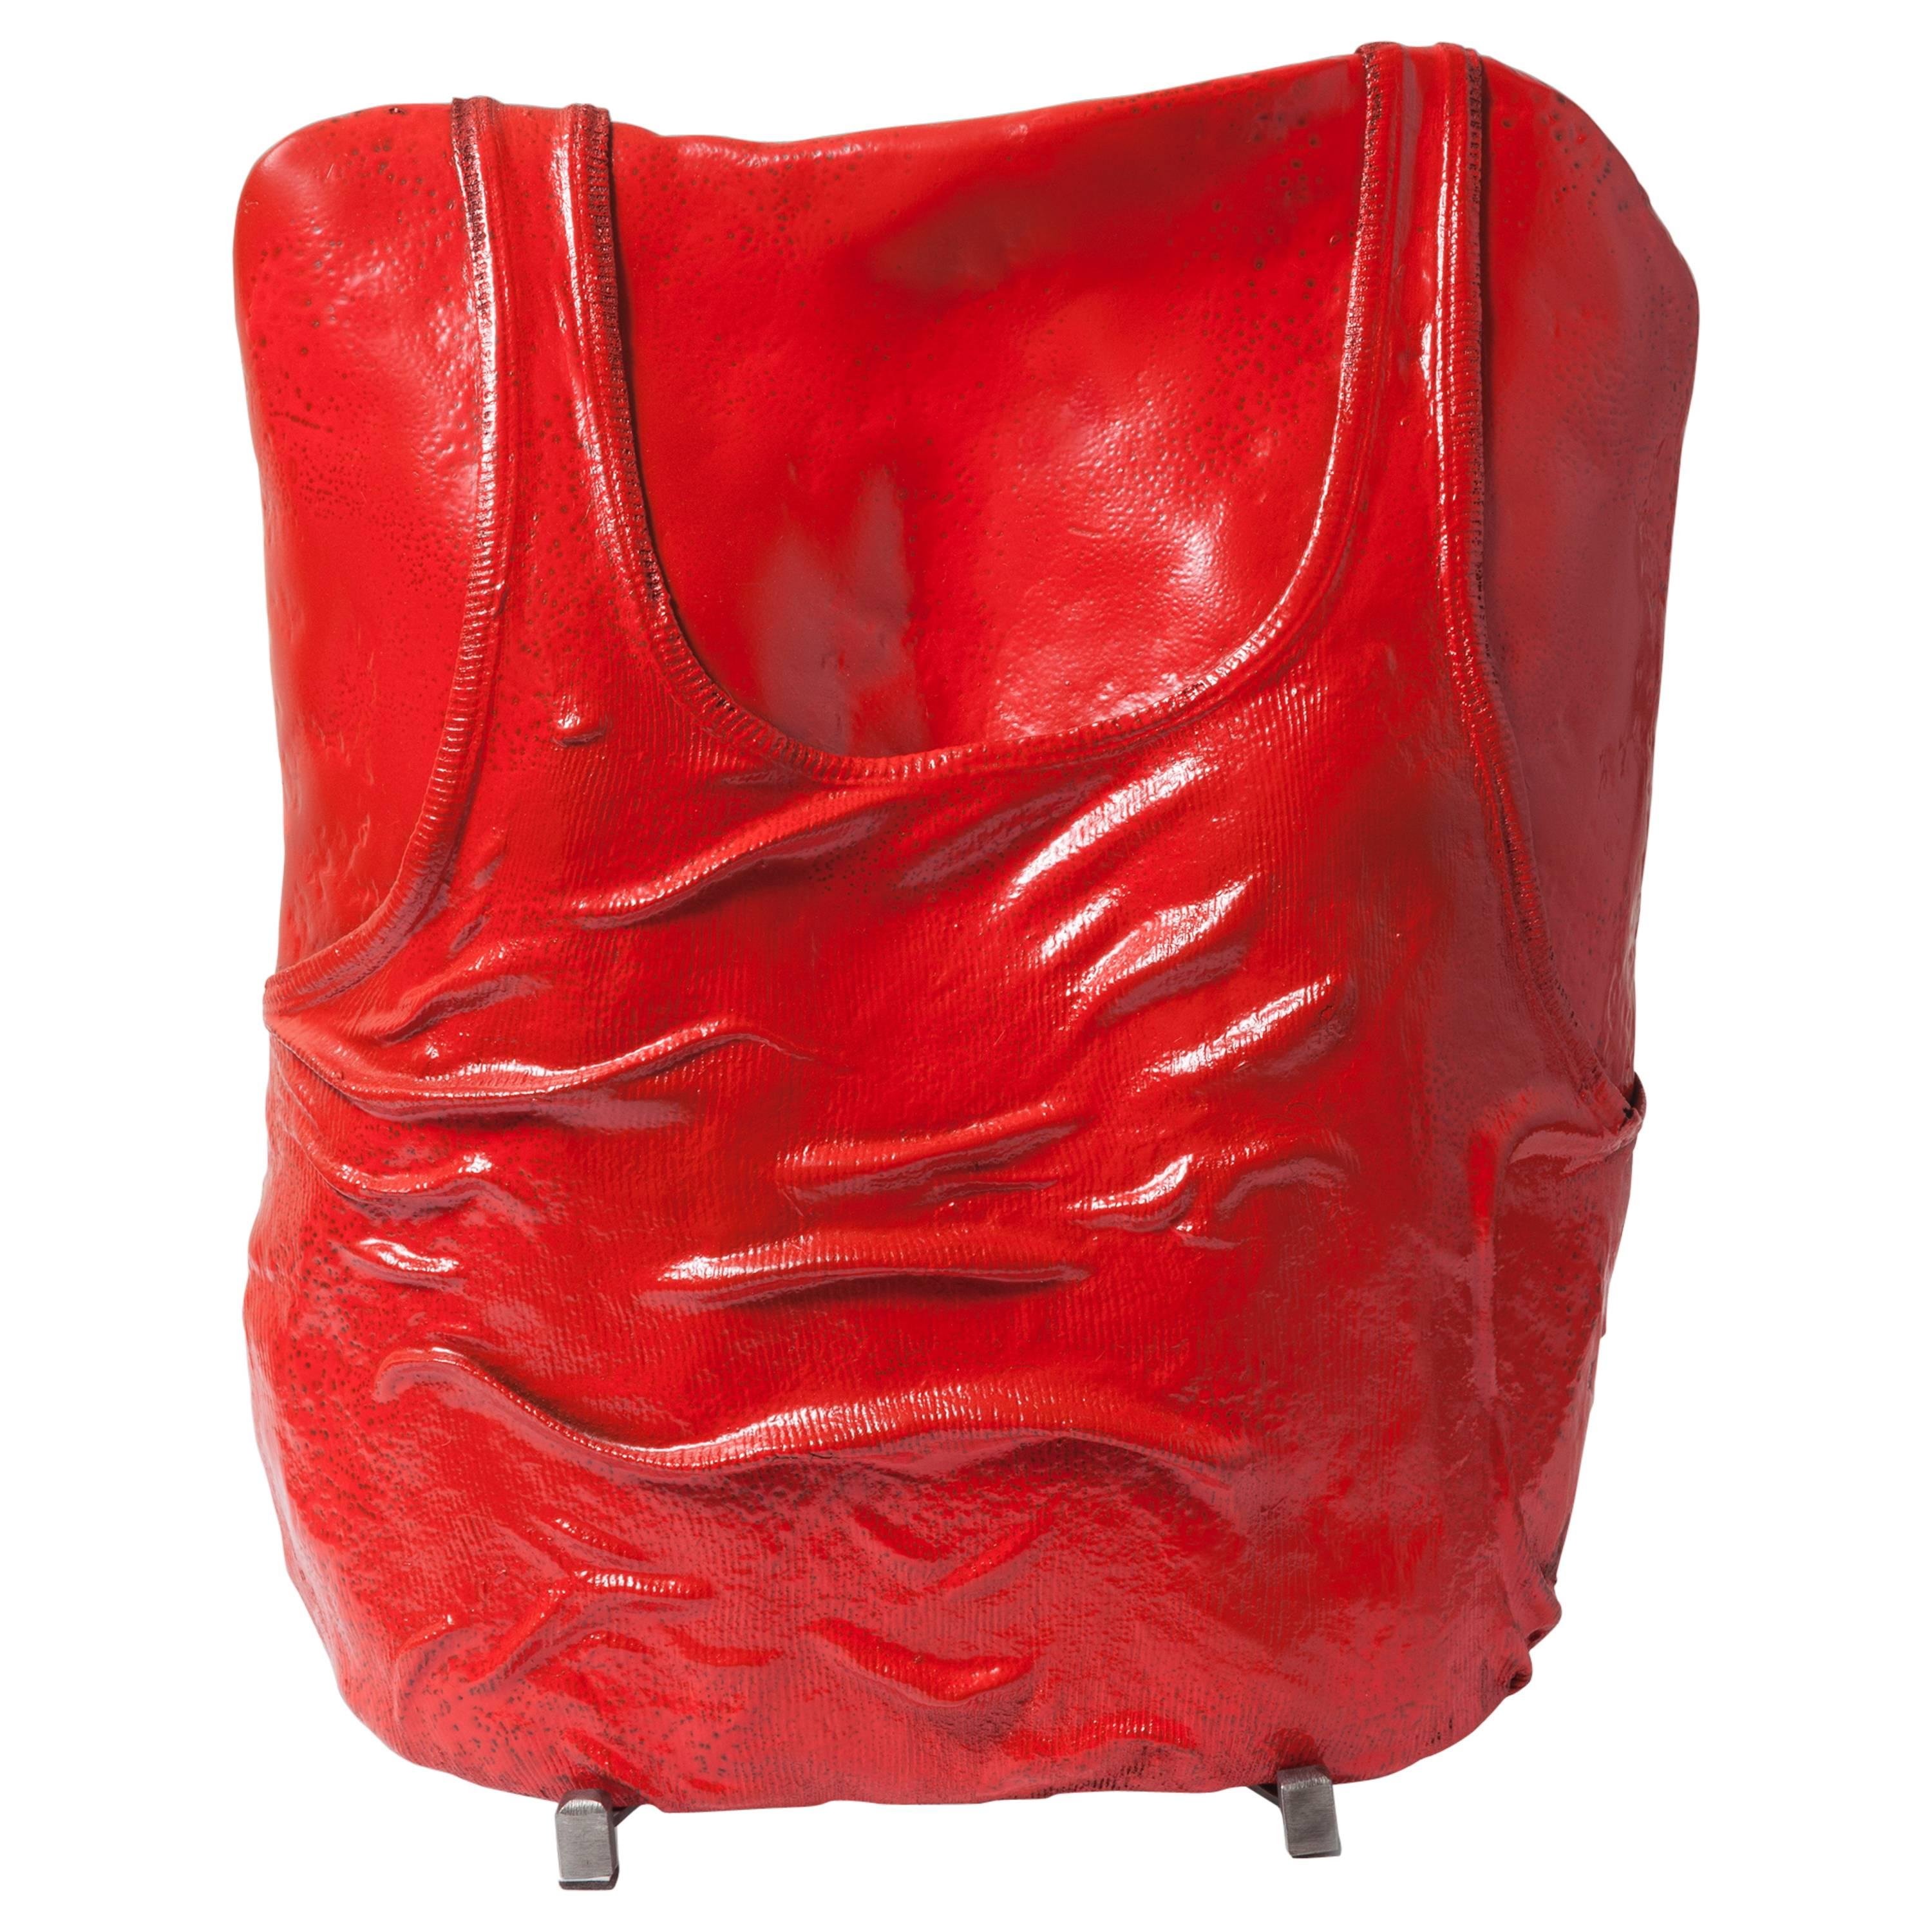 Torso Lacquered Sculpture. Signed in Back 'OB1992' For Sale